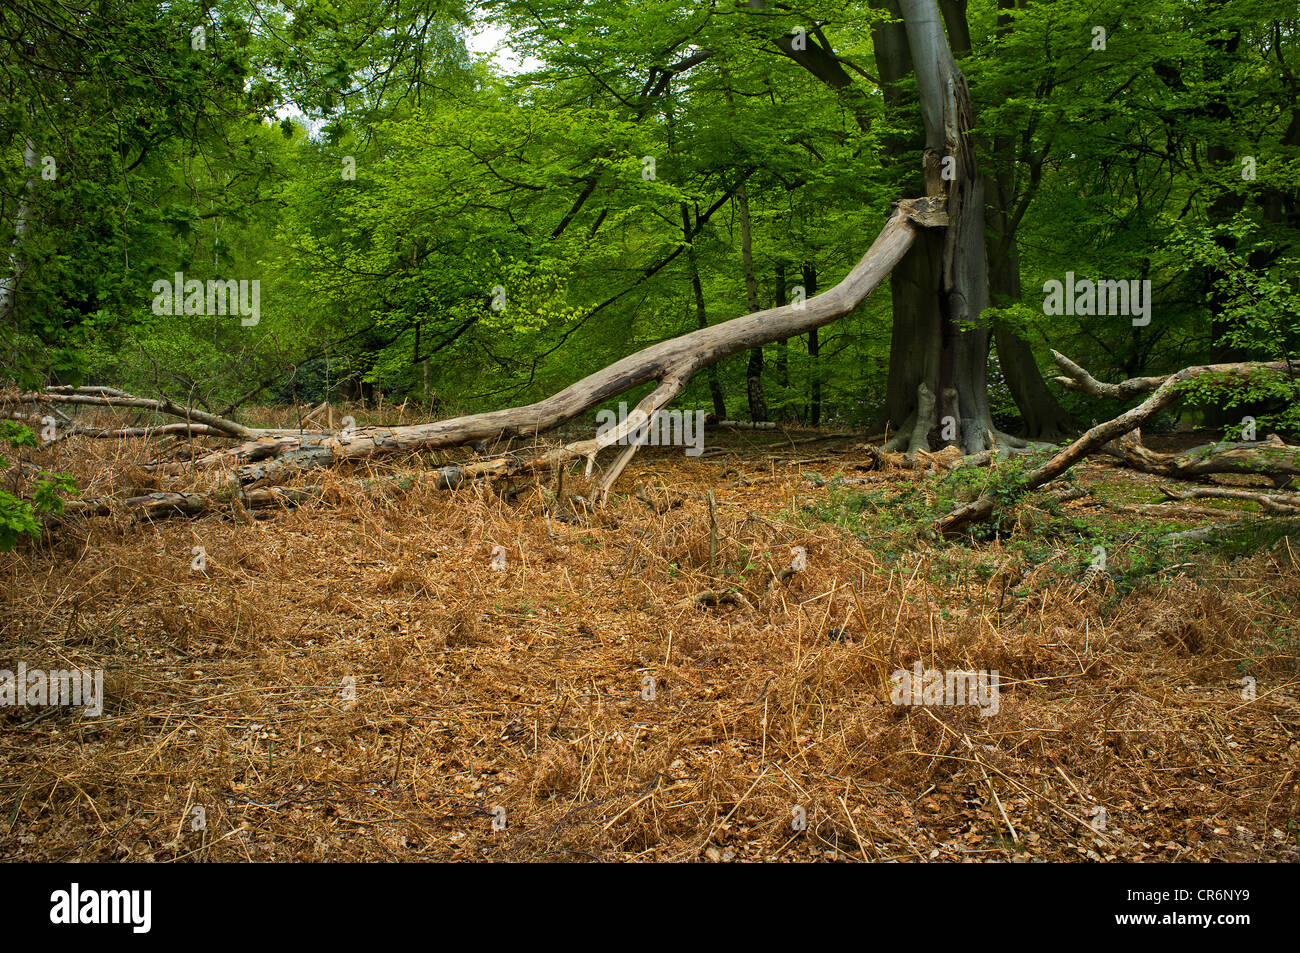 A tree in High Beech Epping Forest Stock Photo